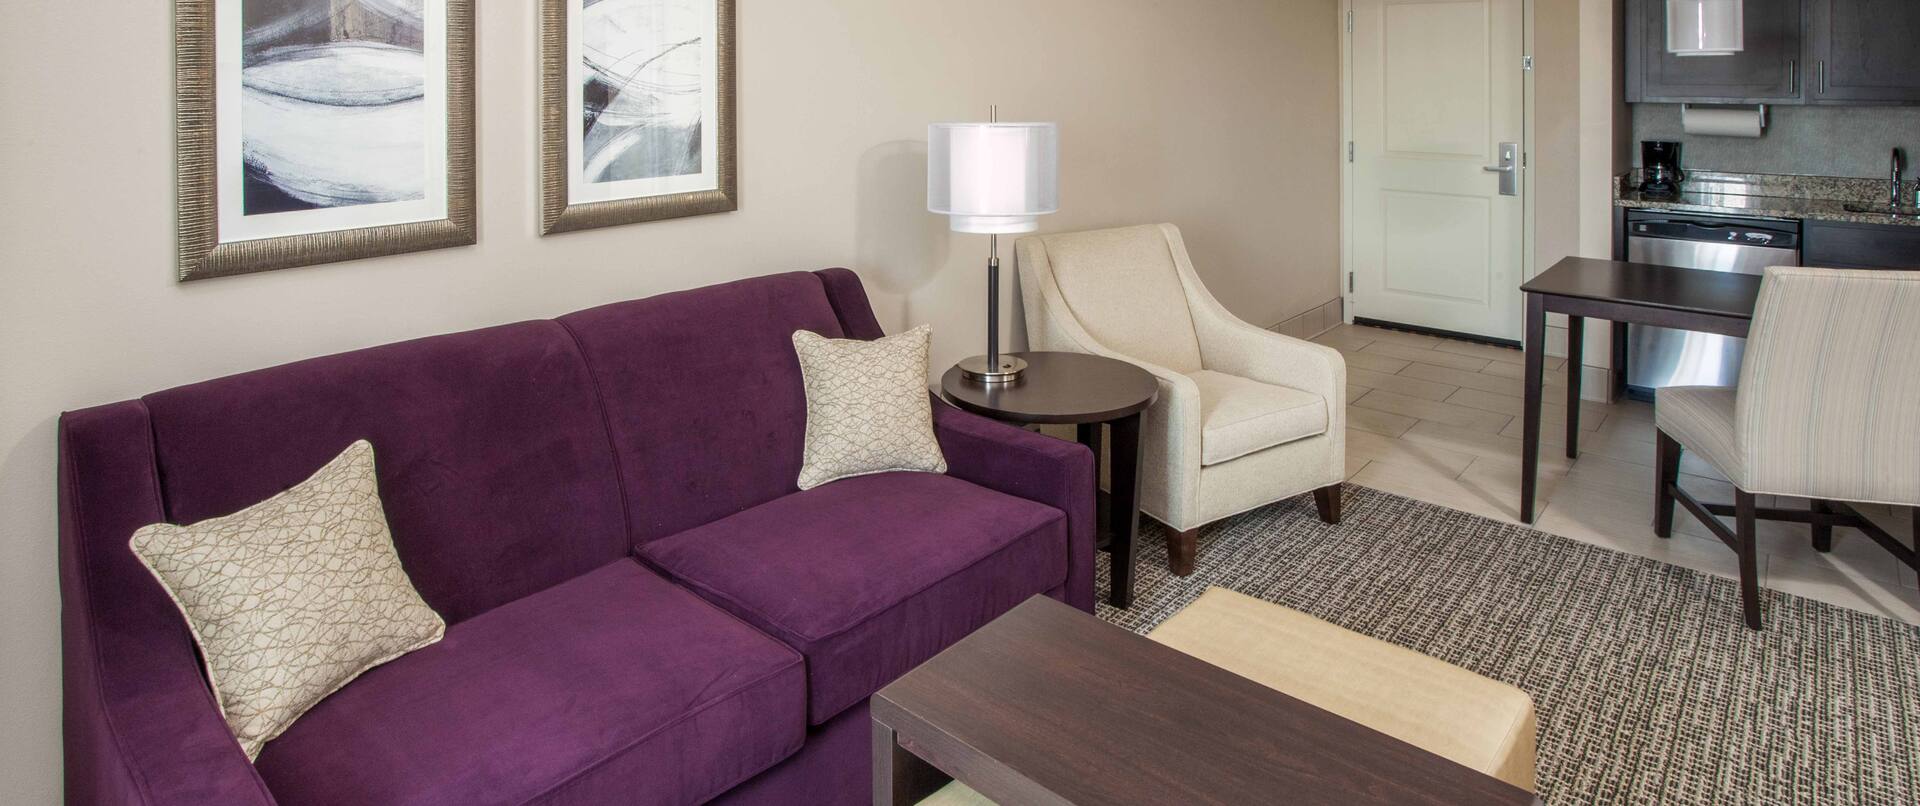 Two Room Suite Living With Purple Sofa, Wall Art, Arm Chair, Dining Table, Kitchen and View of Entry